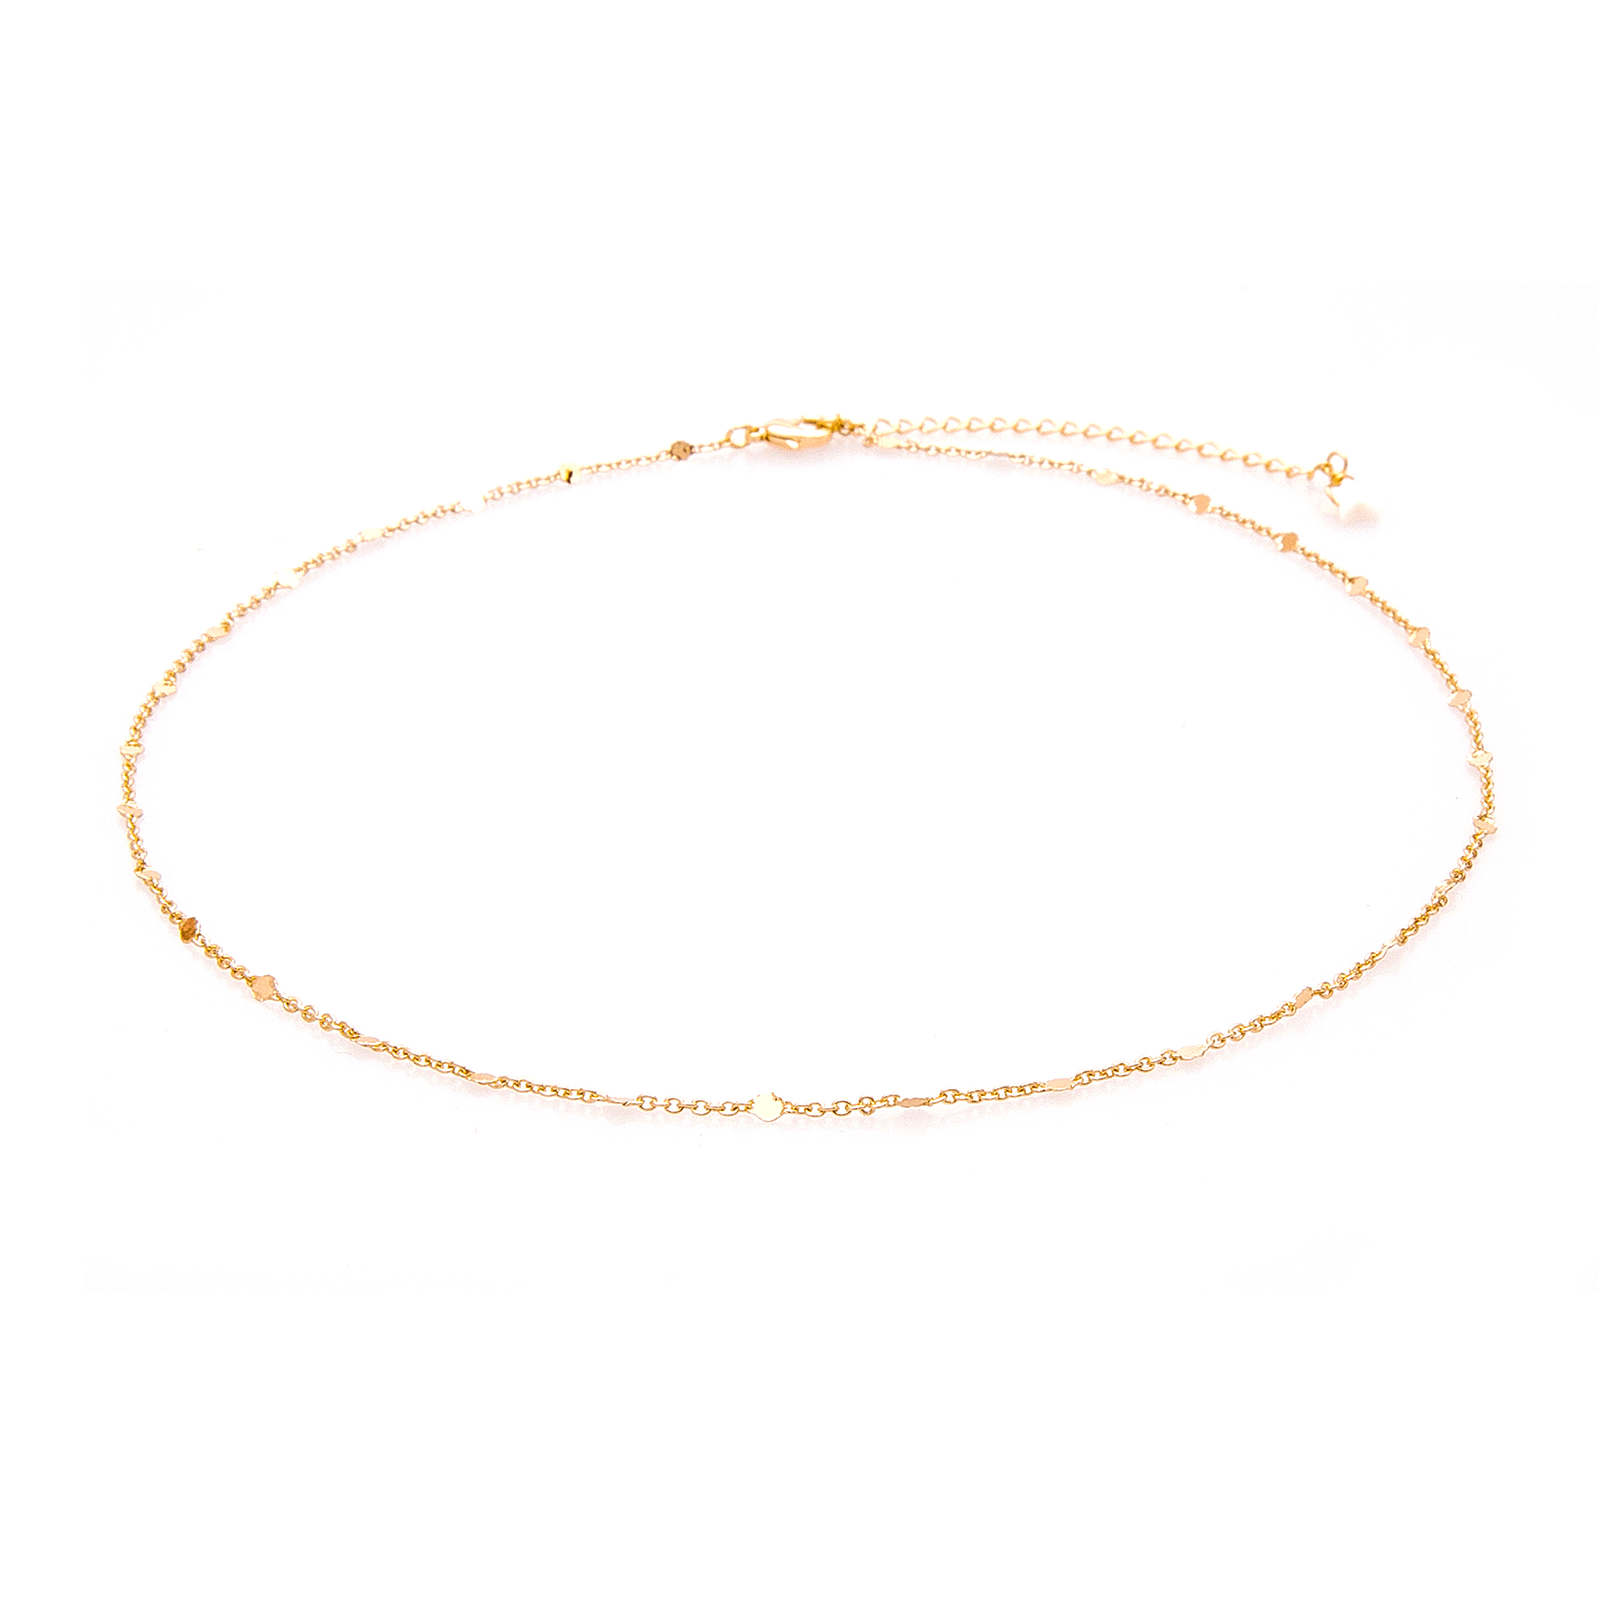 A dainty gold chain necklace